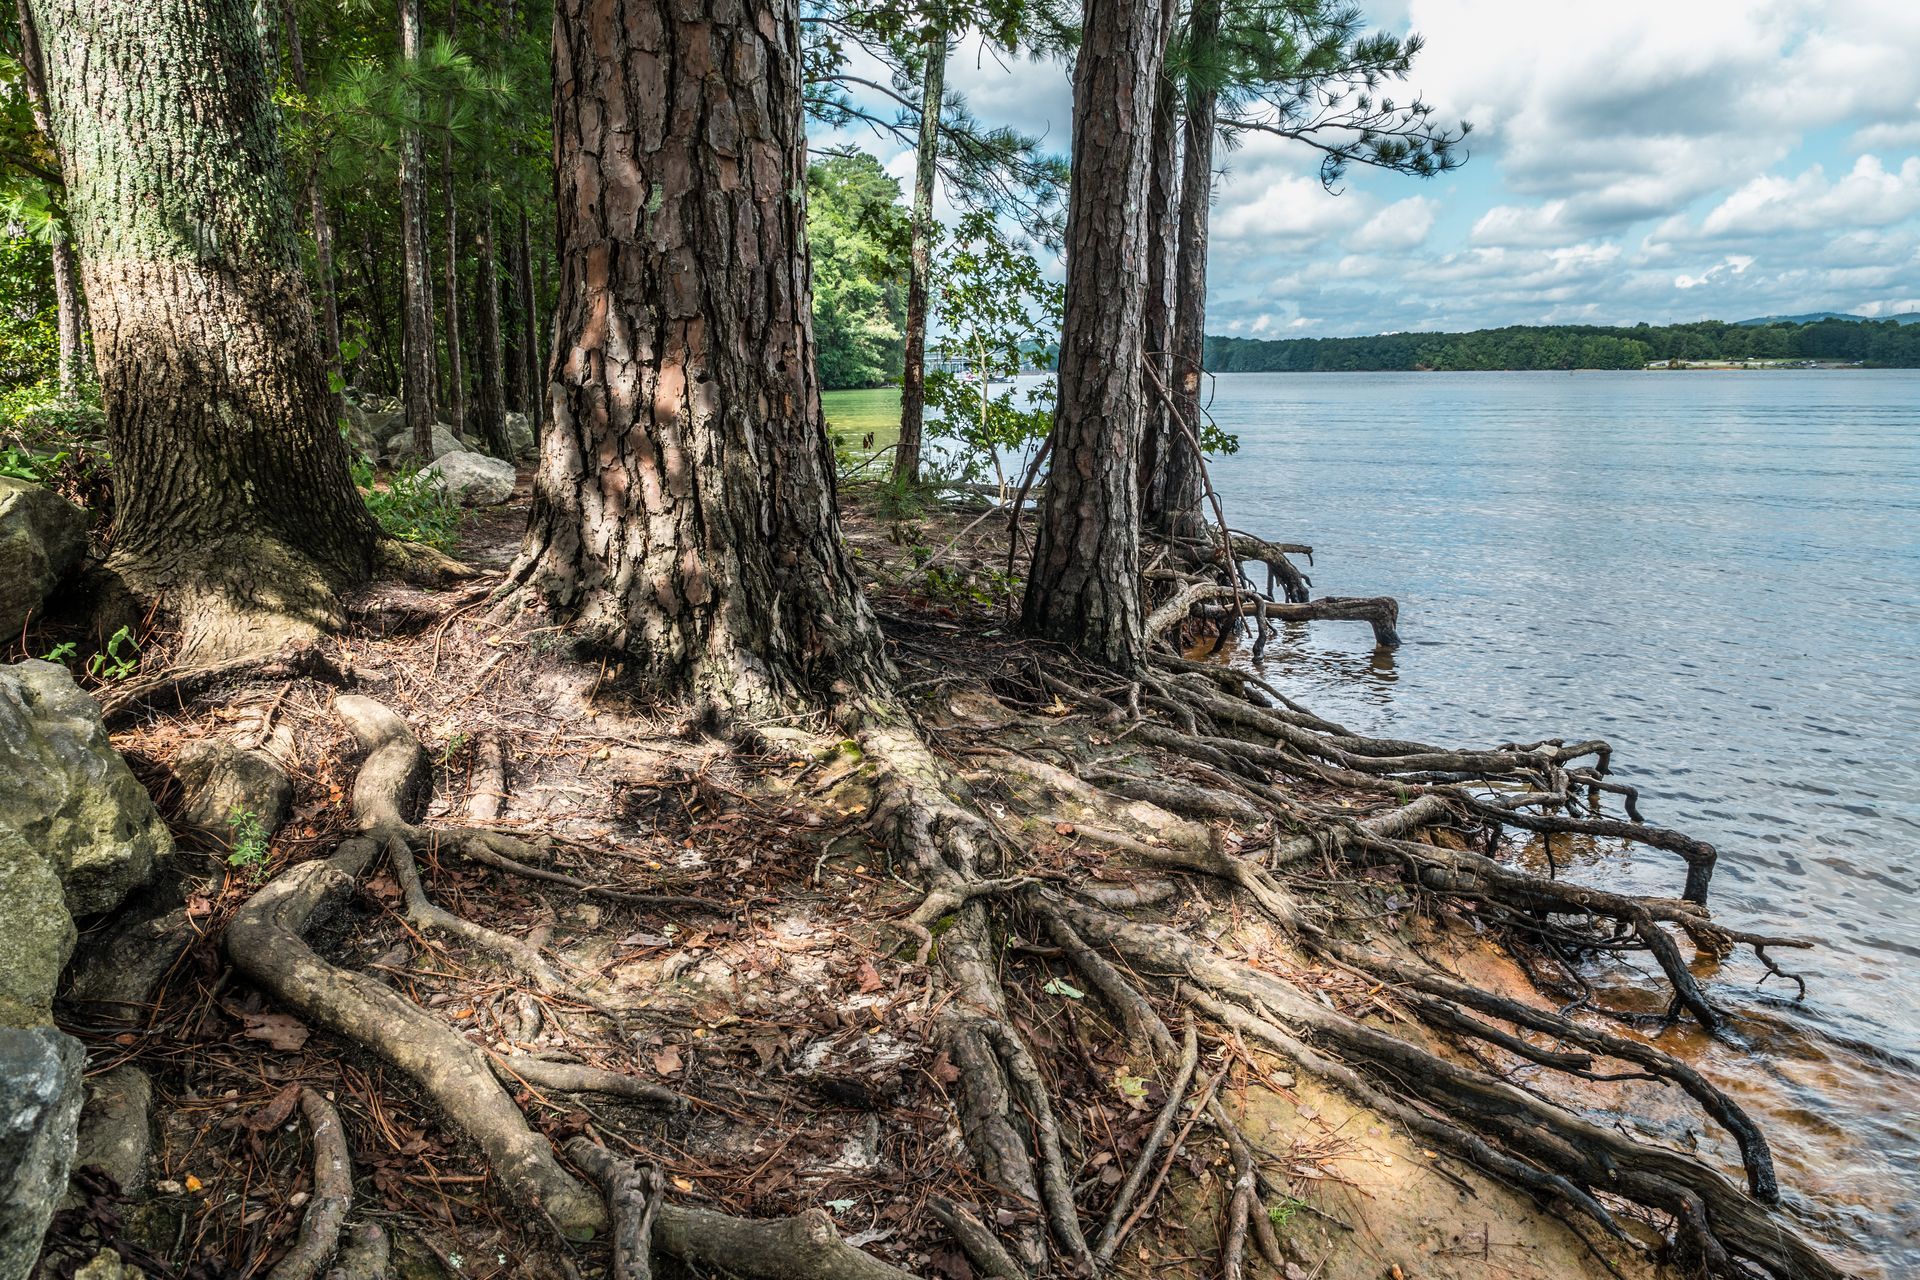 Shoreline erosion in a lake exposes the roots of trees clutching to the embankment.